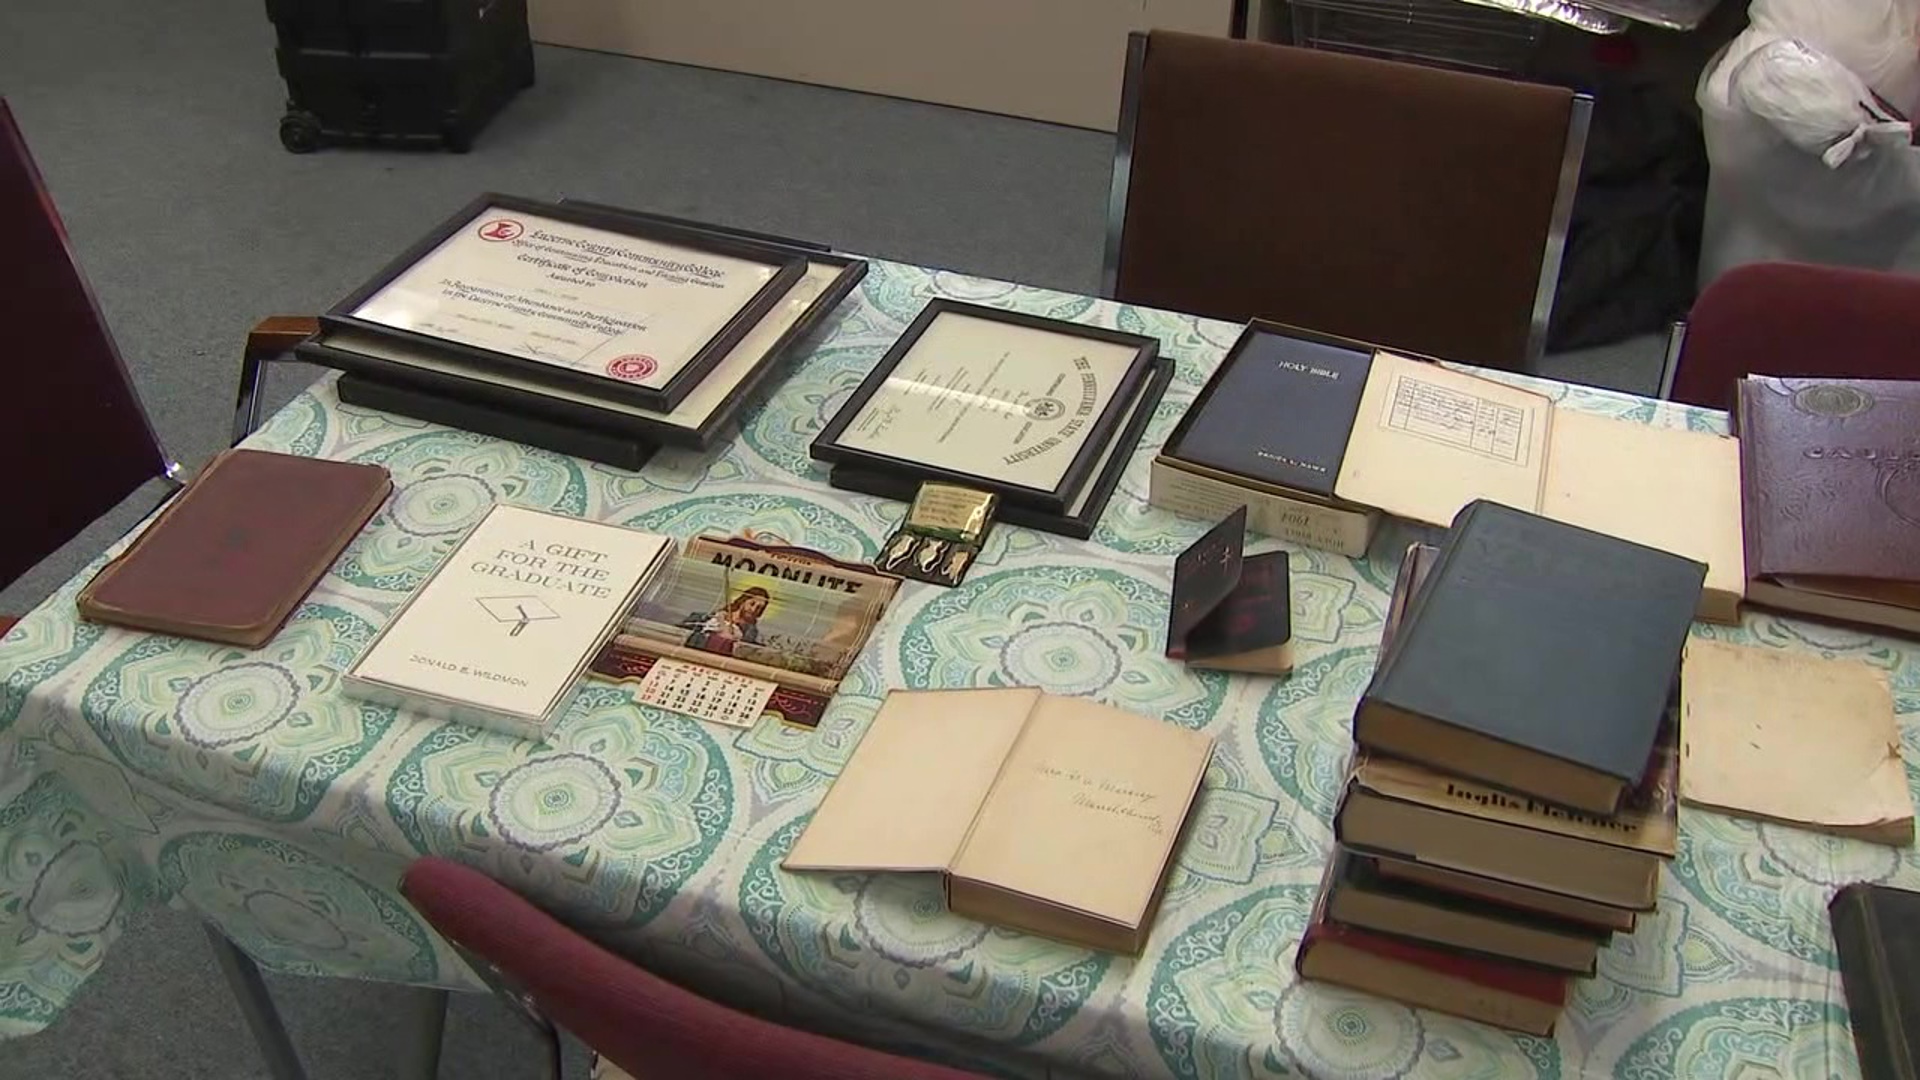 A thrift store in the Poconos is on a mission to reconnect several families with items from loved ones that ended up at the store.